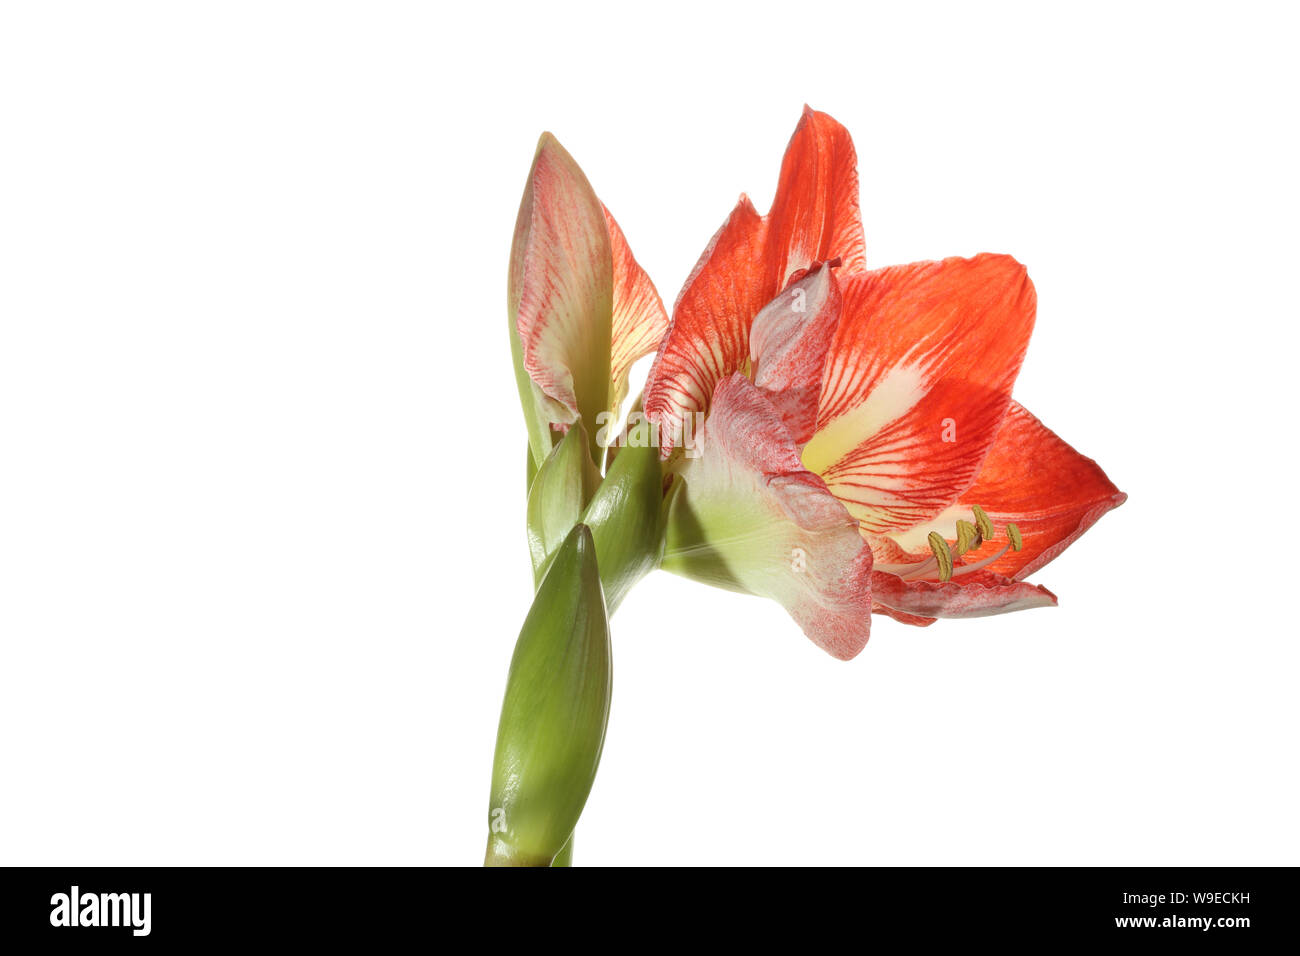 Partially opened flower heads of  a deep pink/red Hippeastrum bulb photographed against a pure white background Stock Photo